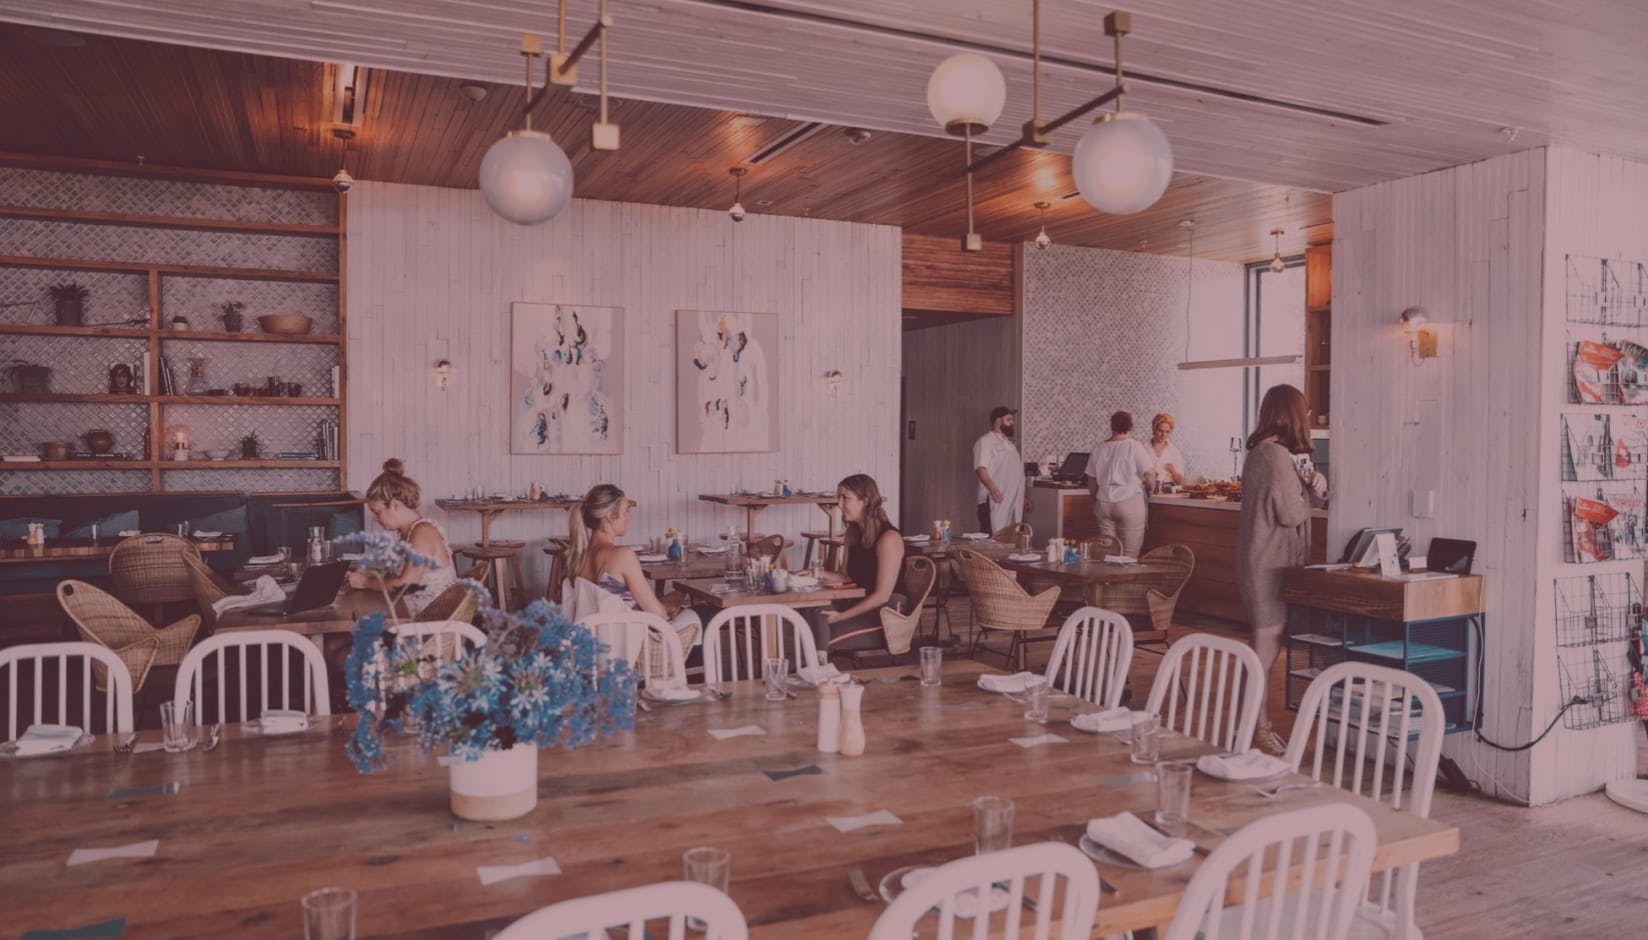 cafeteria at a coworking space